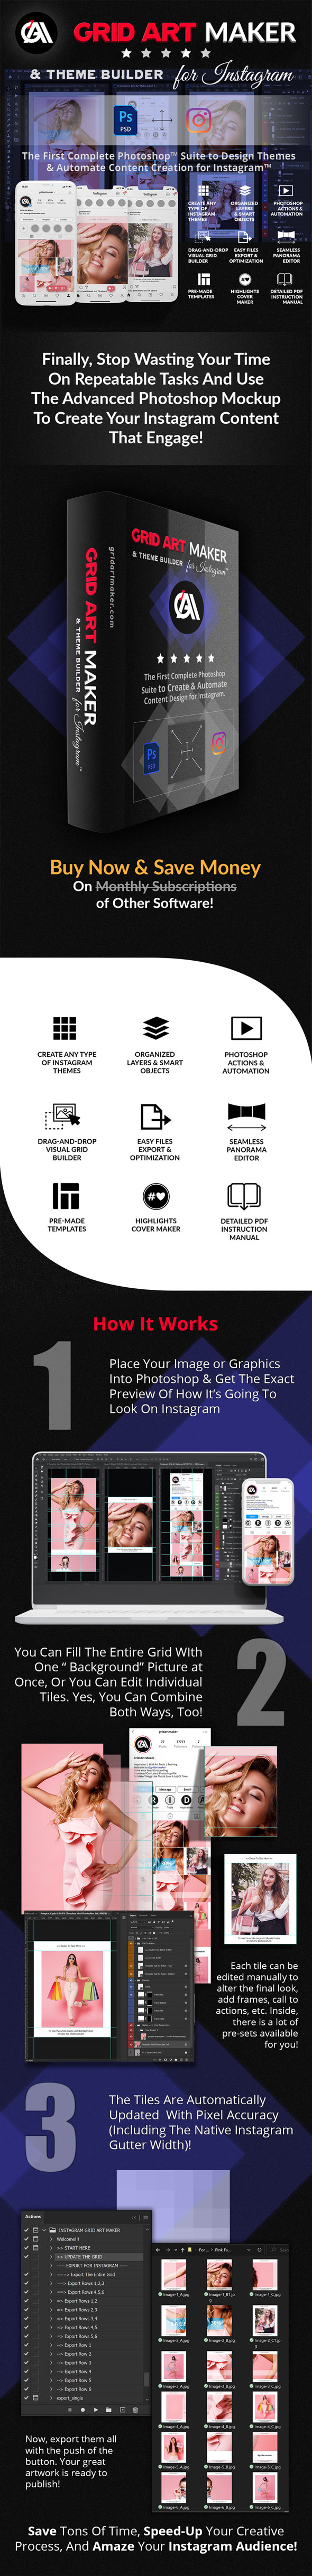 Instagram Grid Art Maker - All-In-One Photoshop Suite